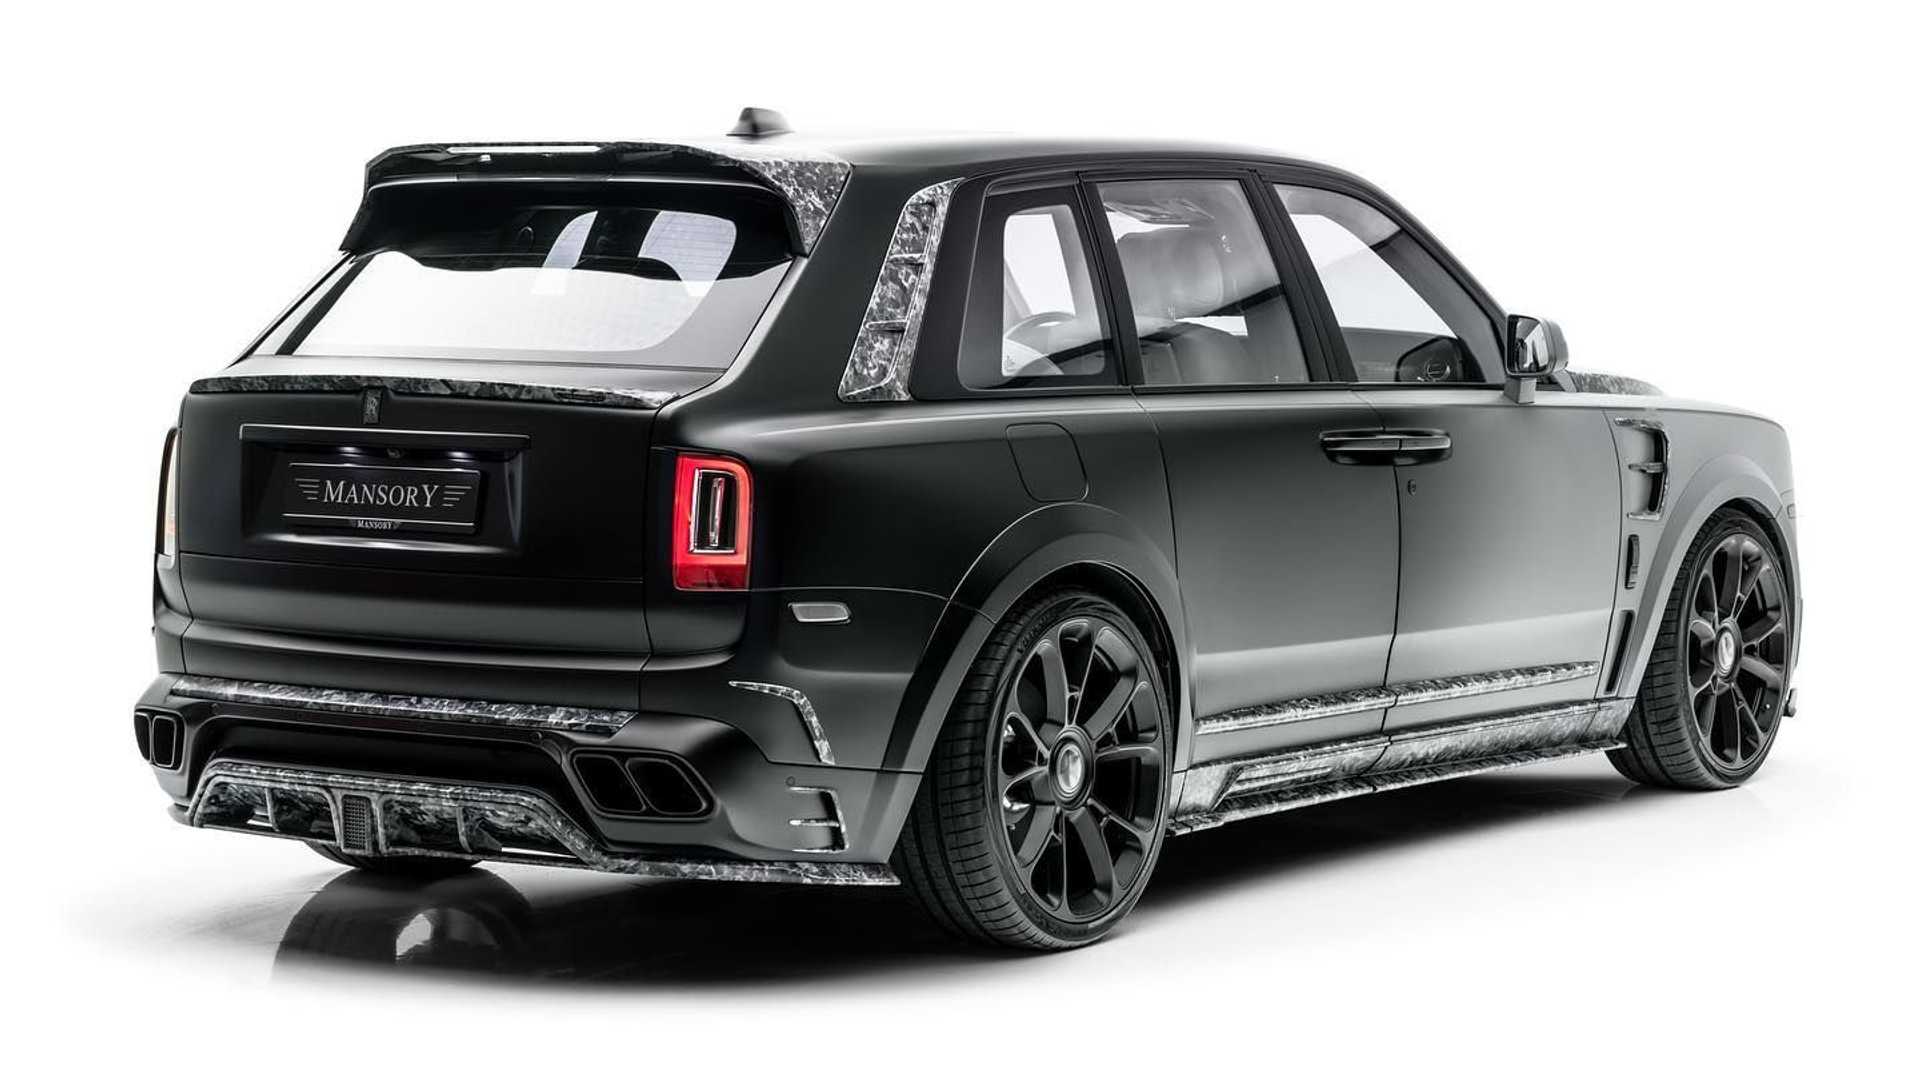 This Mansory Cullinan goes straight to the country of petrodollars